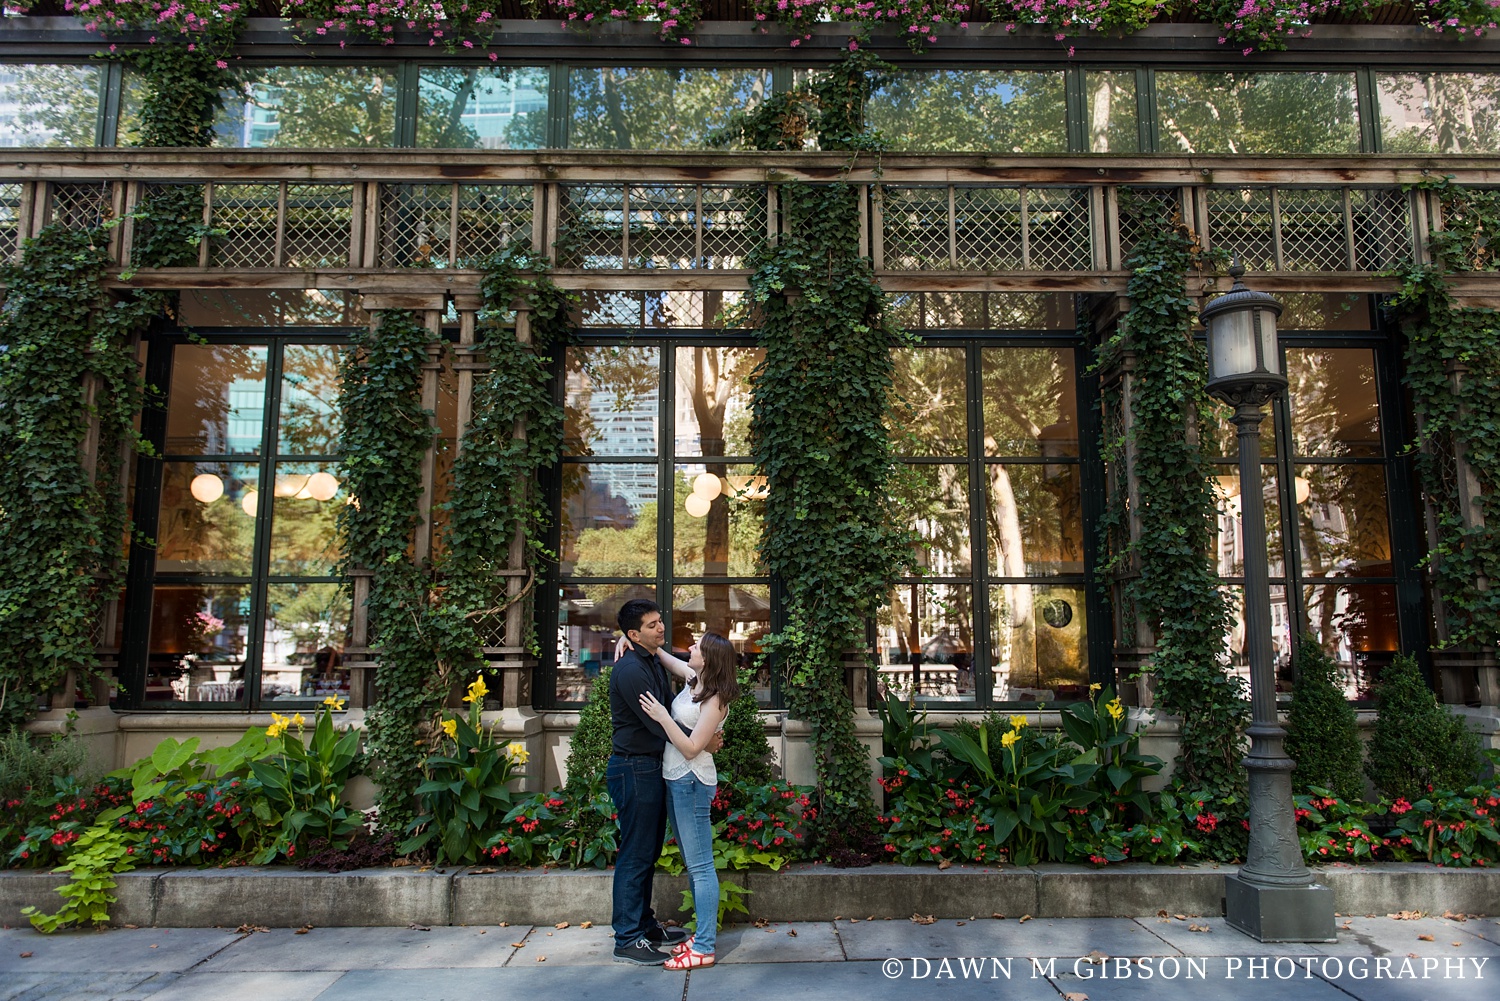 Katie and Andre's Engagement Session | Photos by Dawn M Gibson Photography